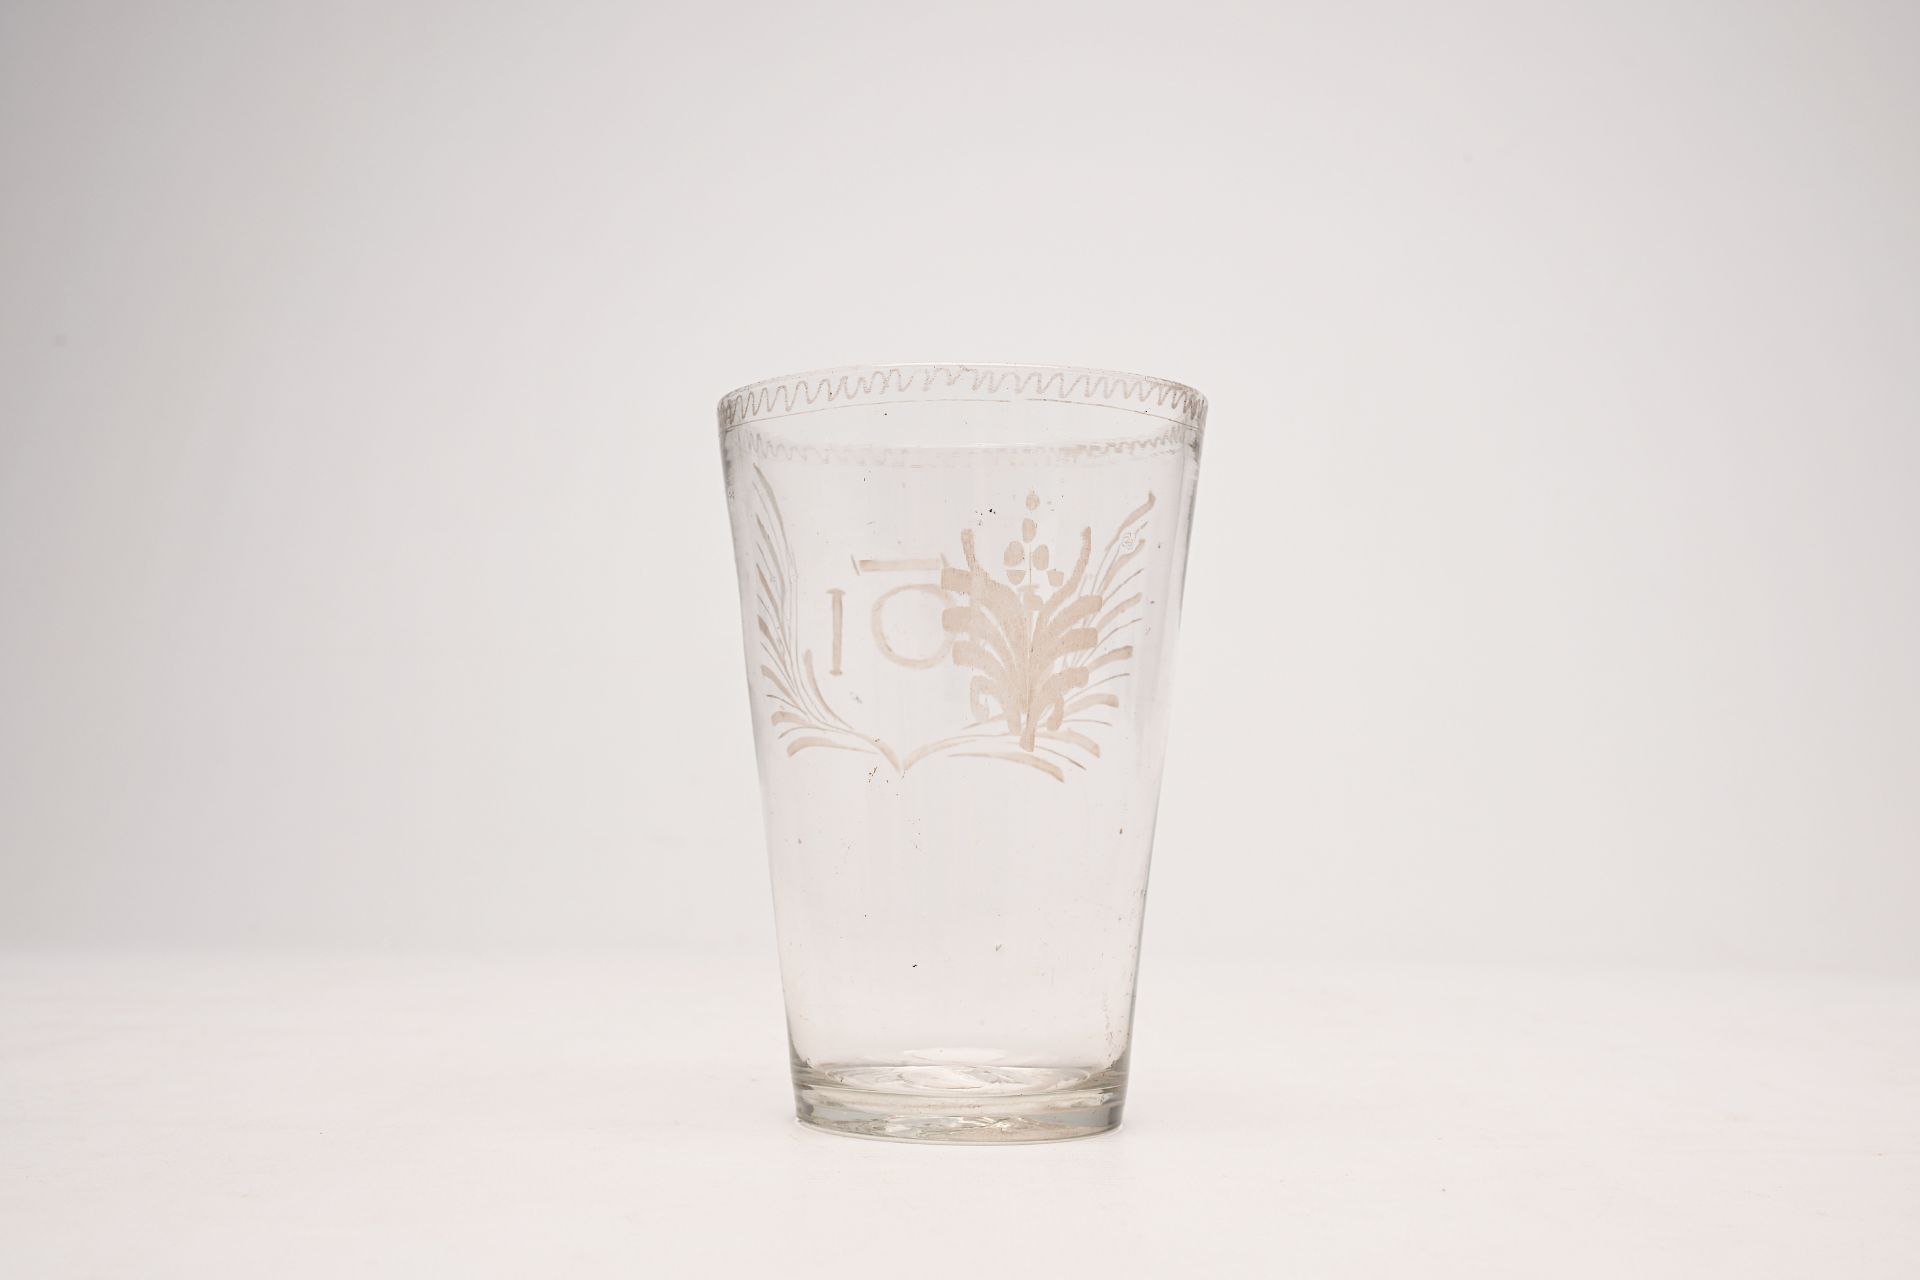 An etched or engraved glass with monogram NOI, end 18th C. - Image 2 of 6